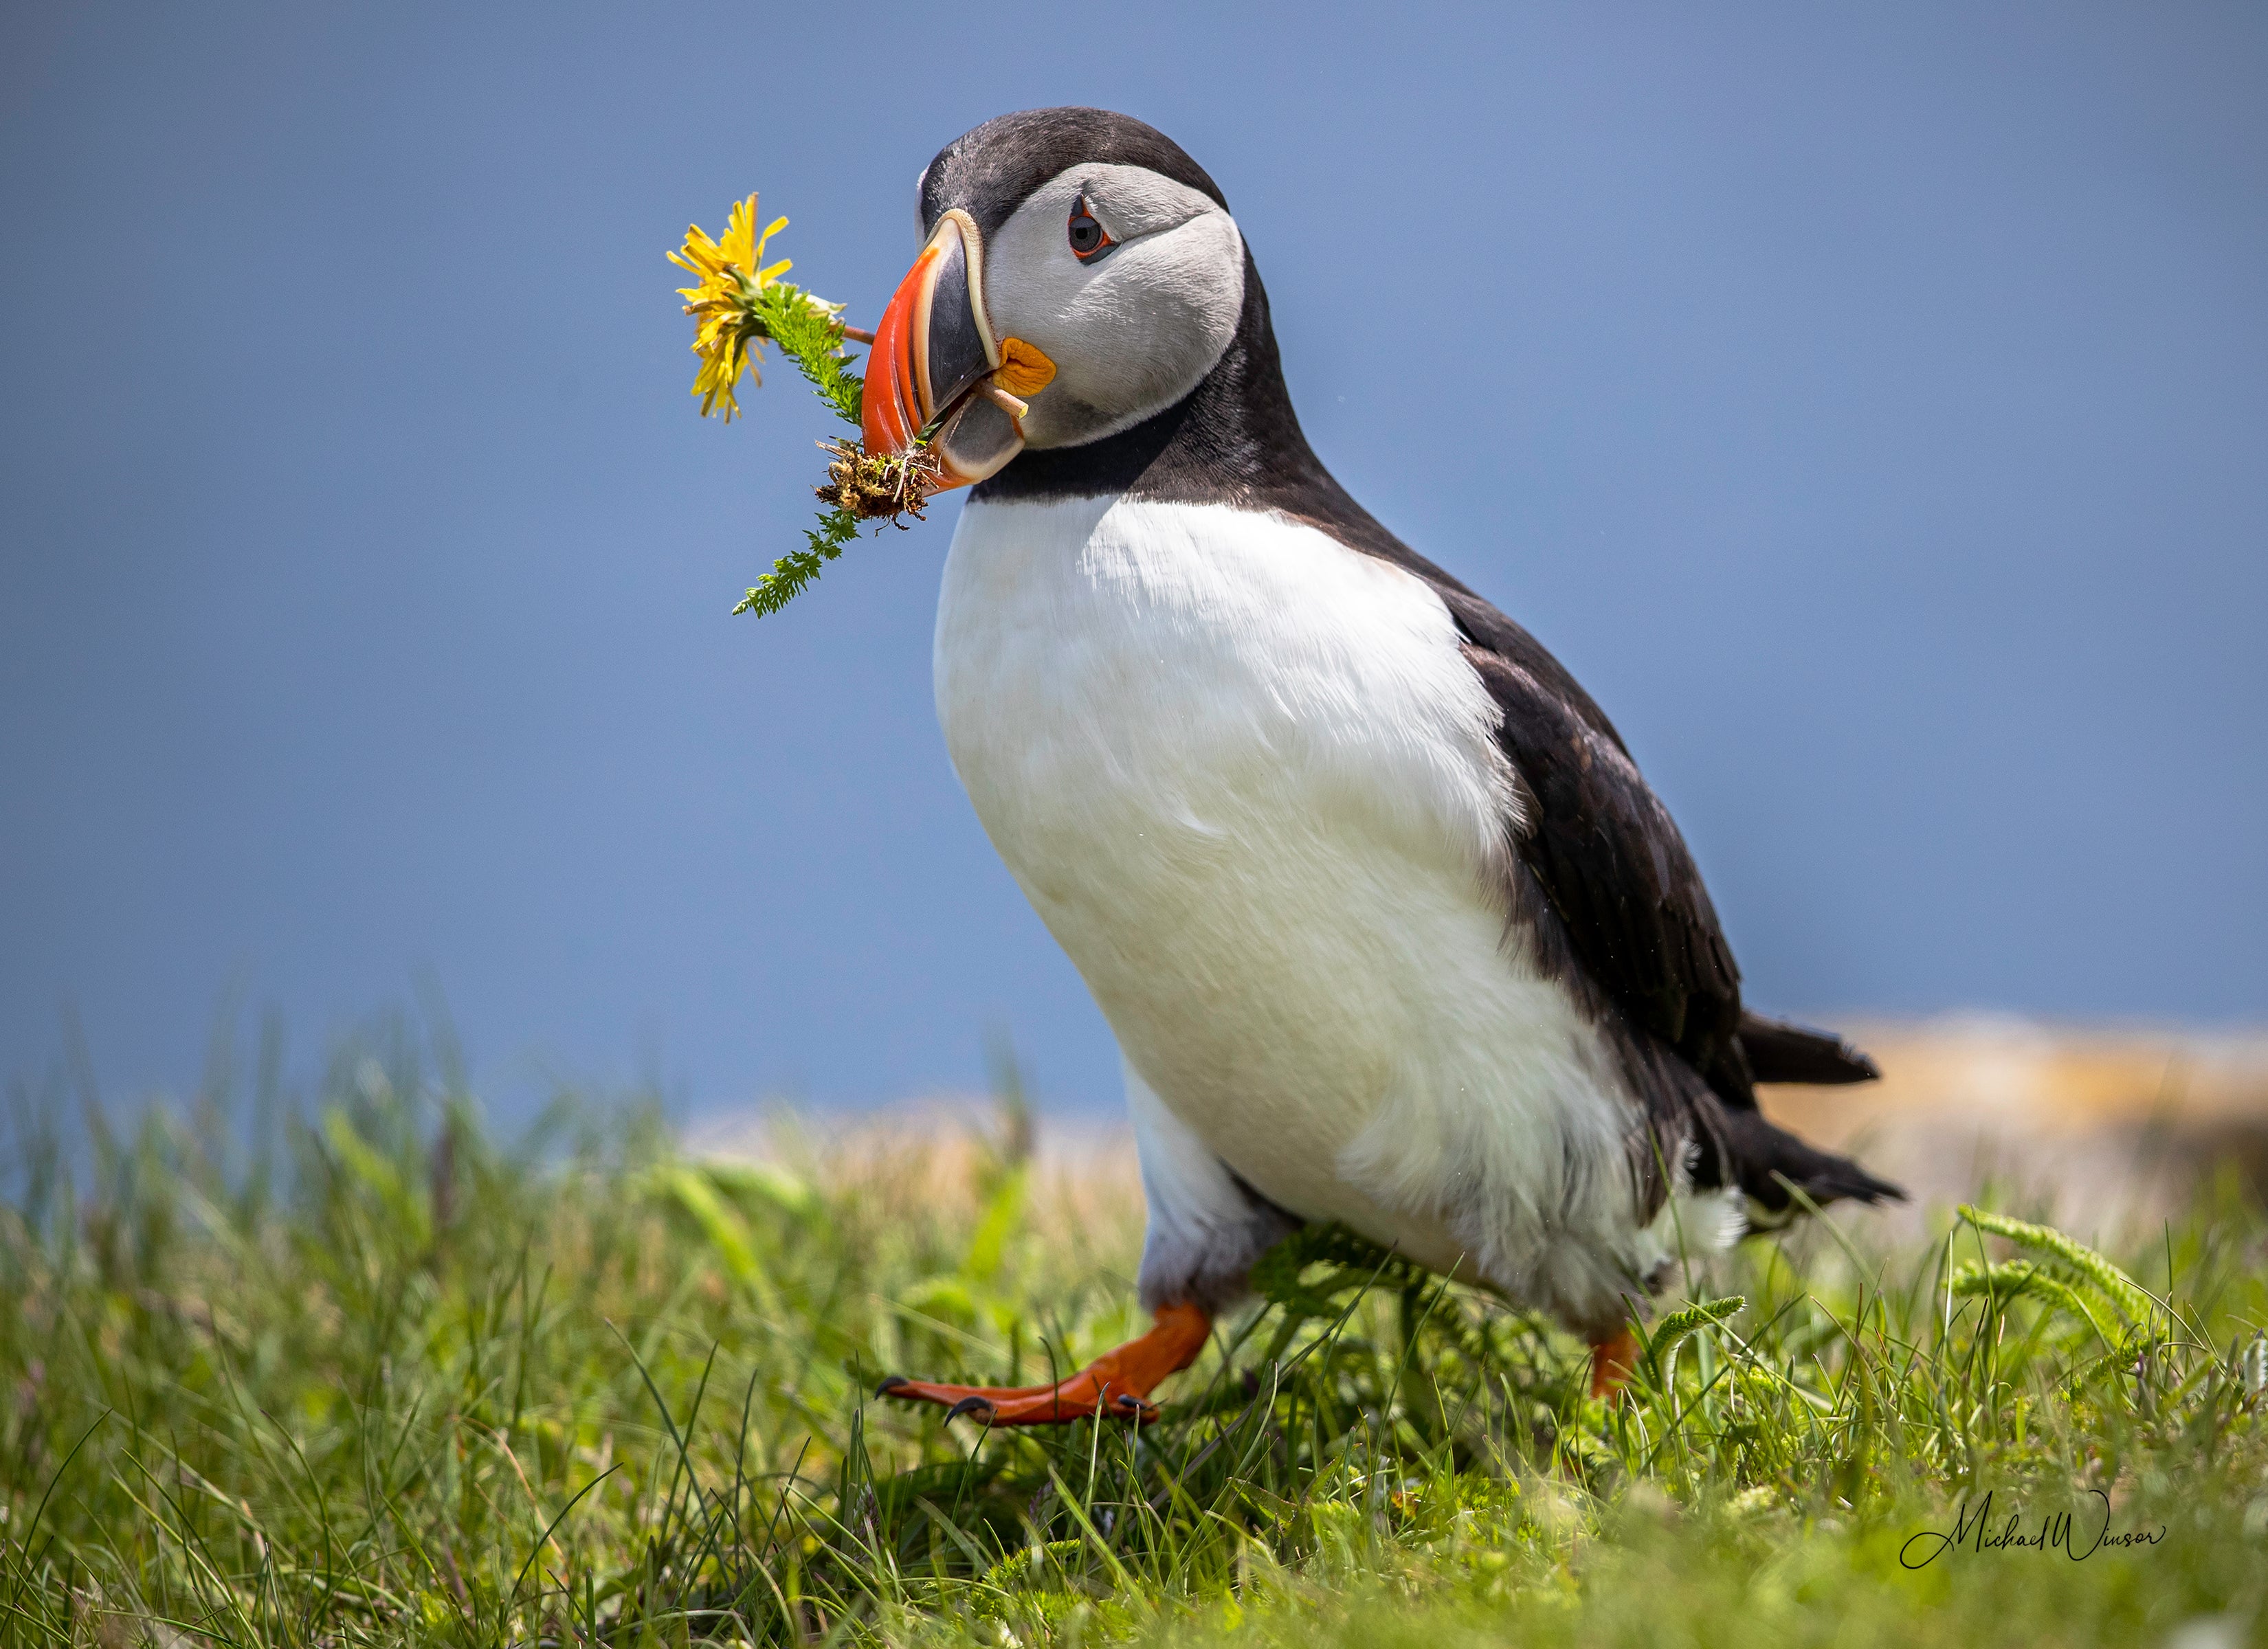 Puffin Nesting Material